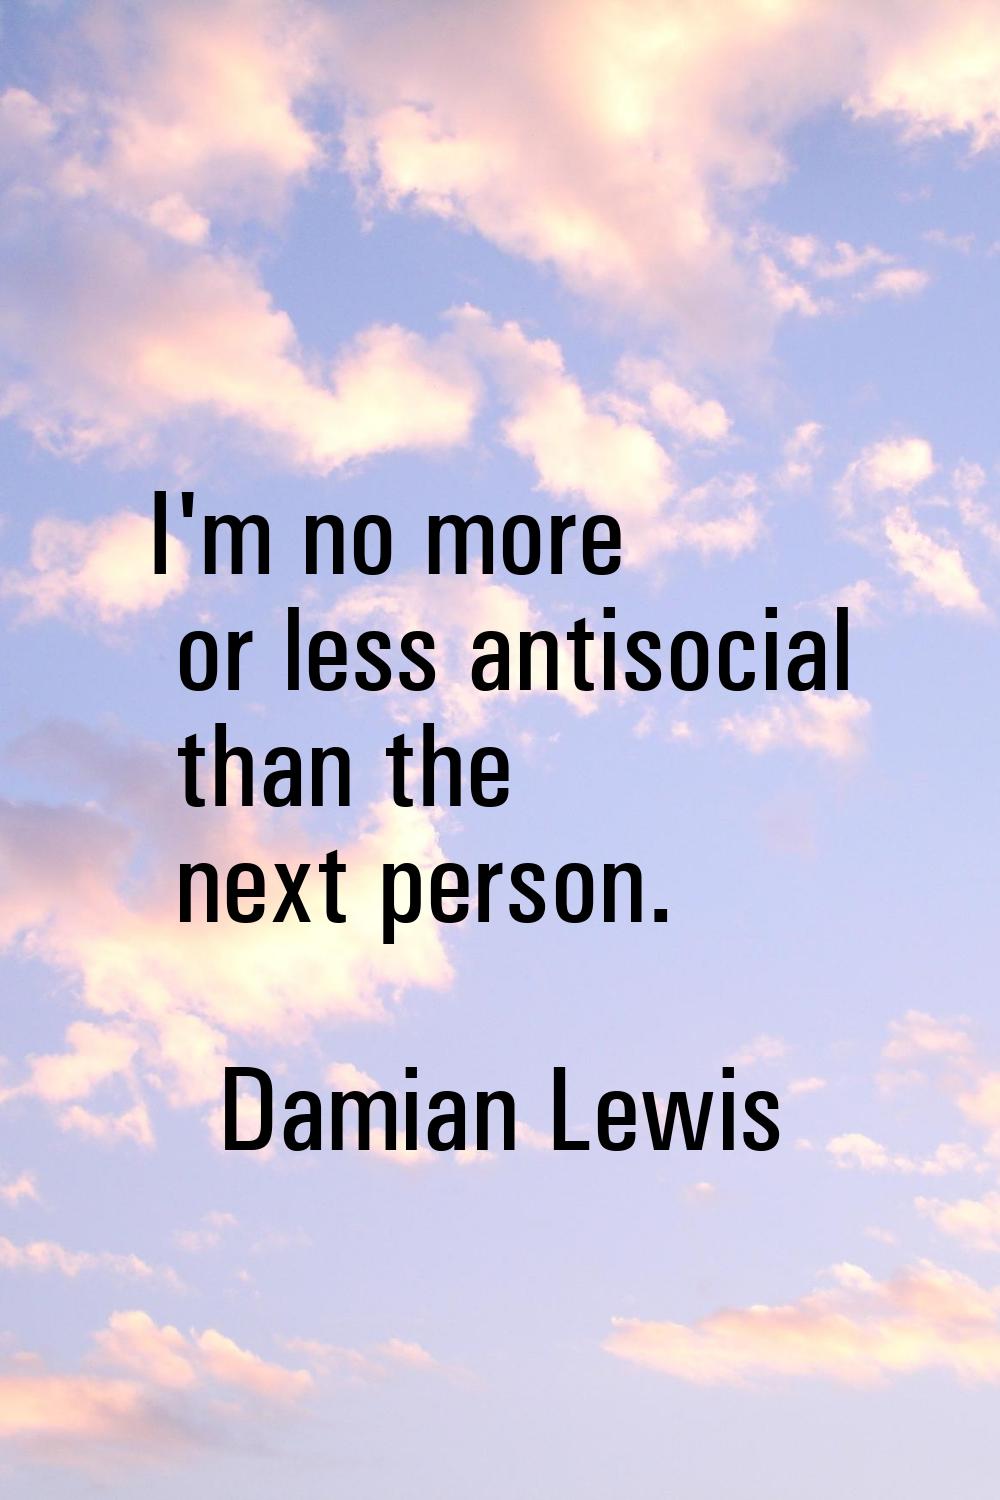 I'm no more or less antisocial than the next person.